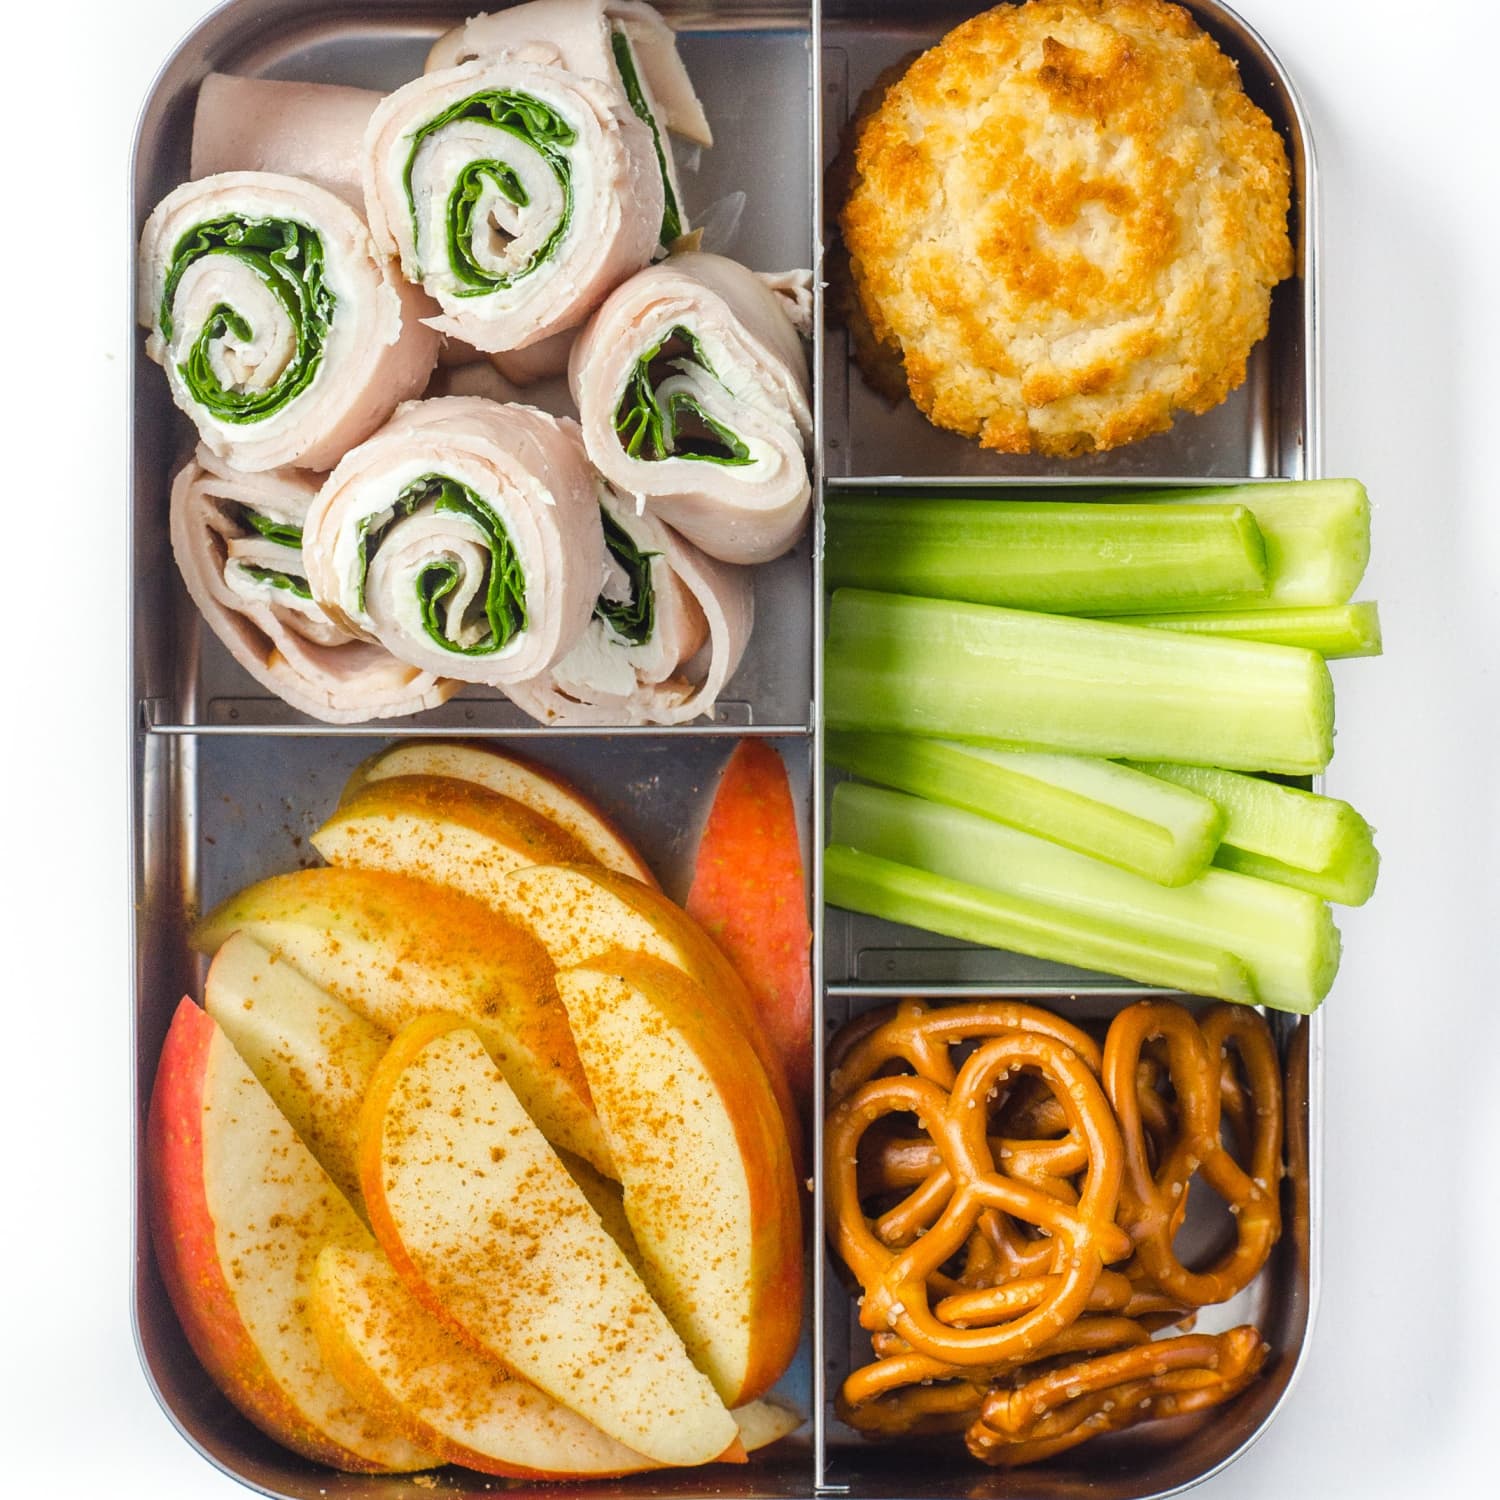 The 10 Best Lunch Box Groceries, According to Daycare Providers